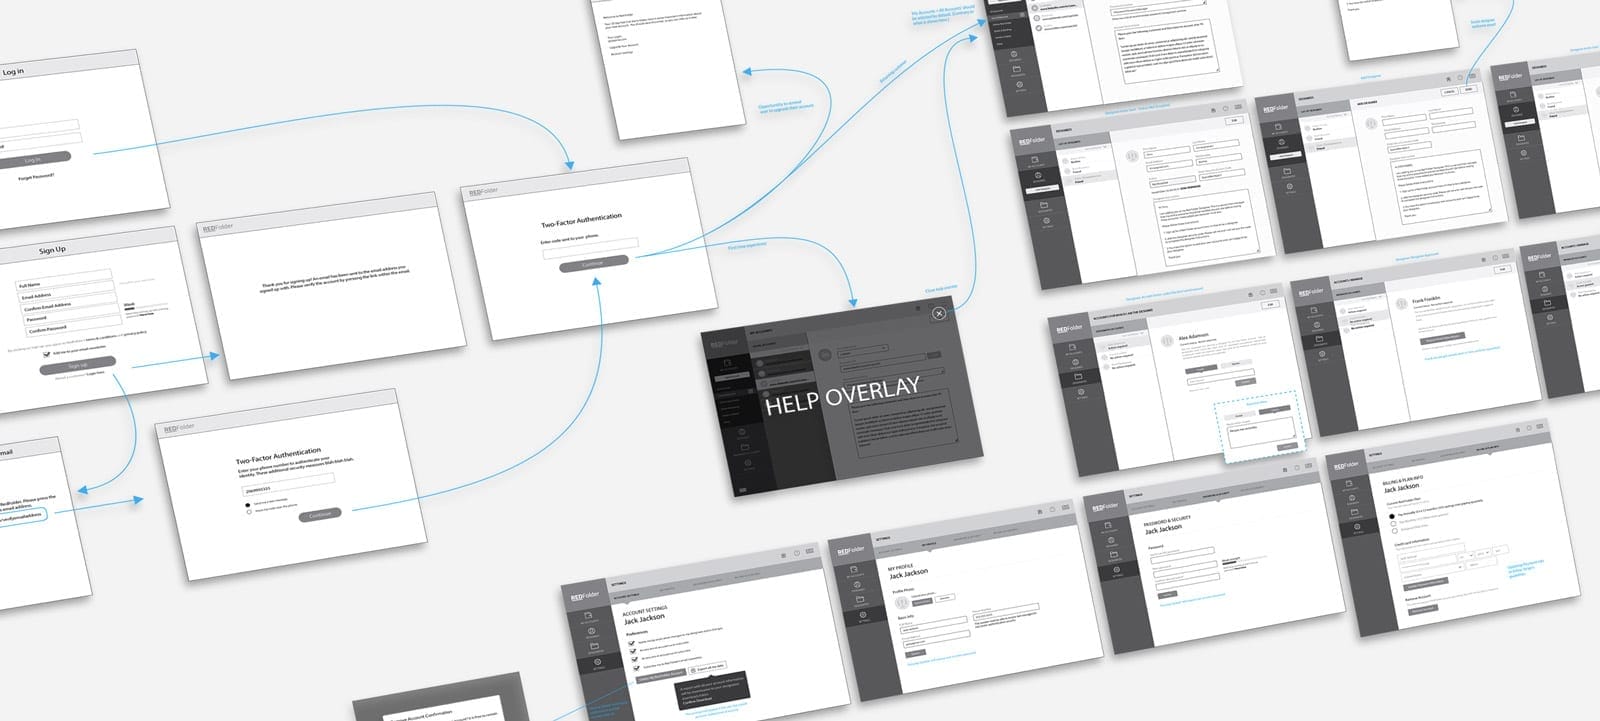 an example of what the wireframe process looks like